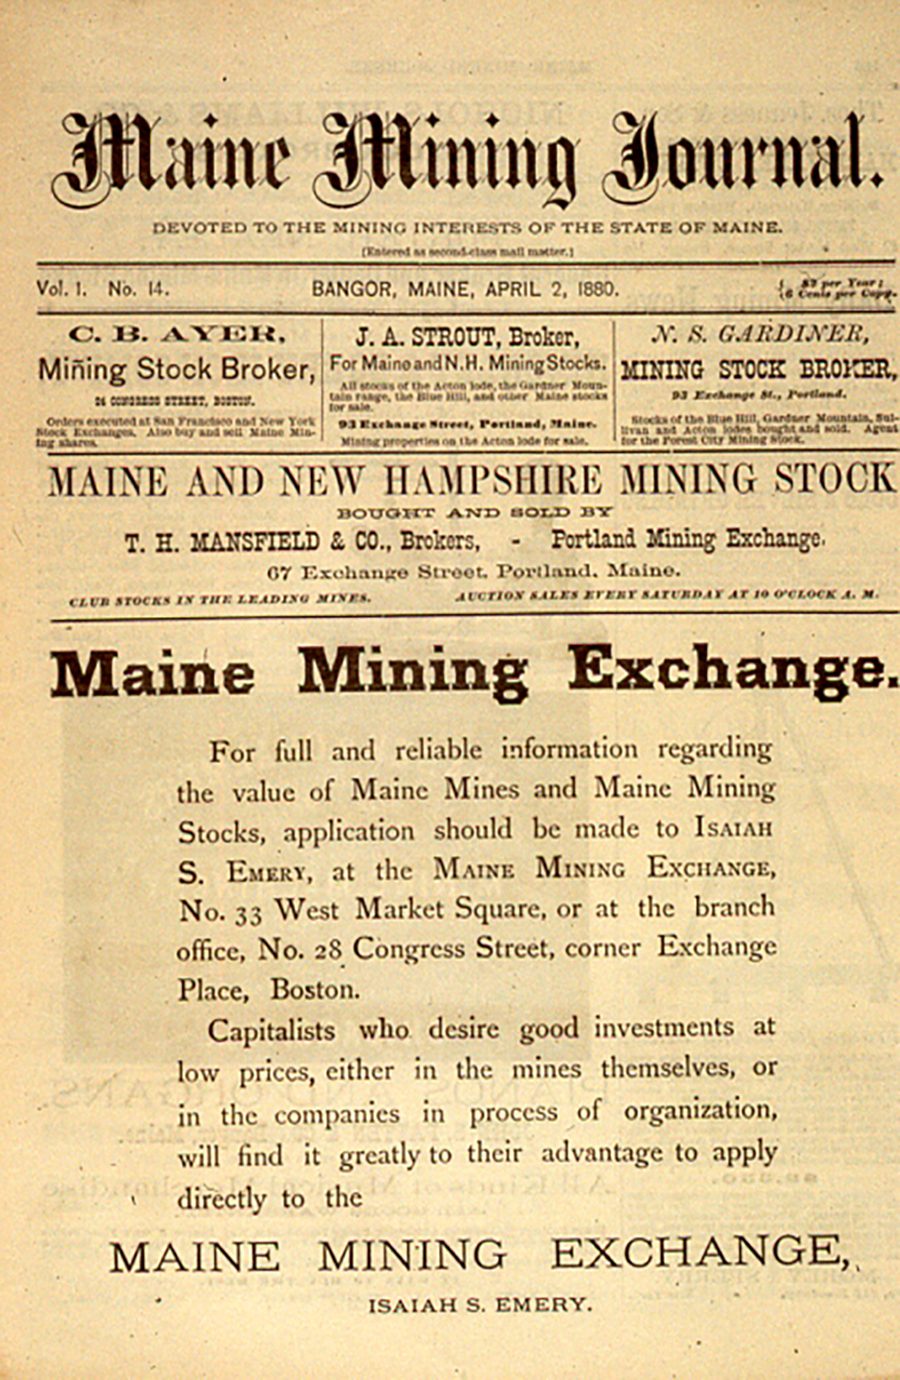 metal mining newspaper article from 19th century